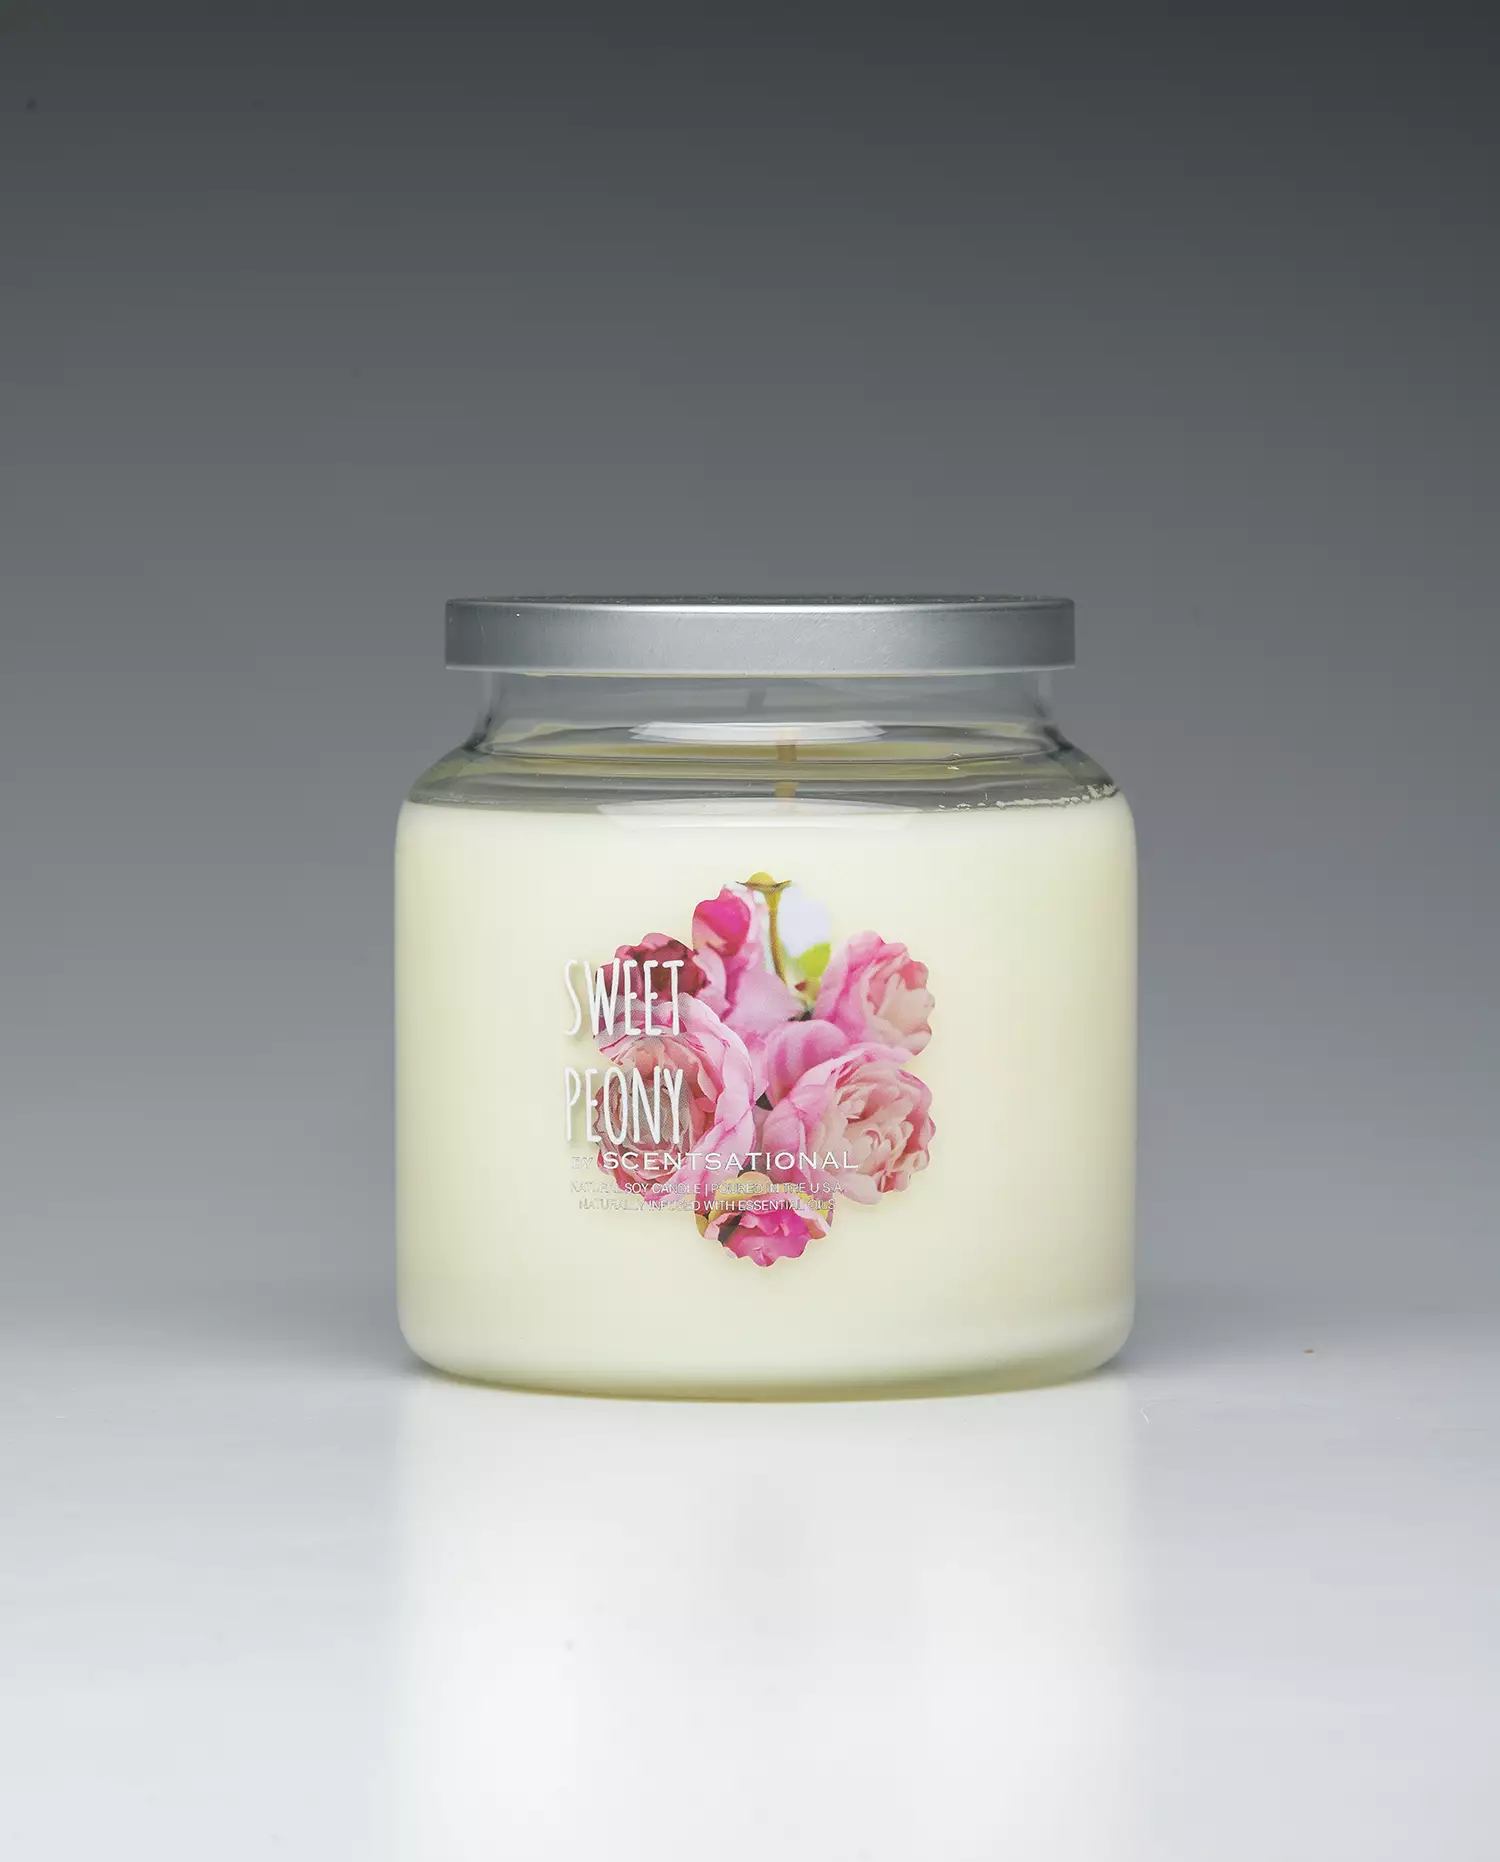  Jarful House Magnolia + Peony Wax Melts PS I Love You, Floral  Scent Coconut Melts Clamshell